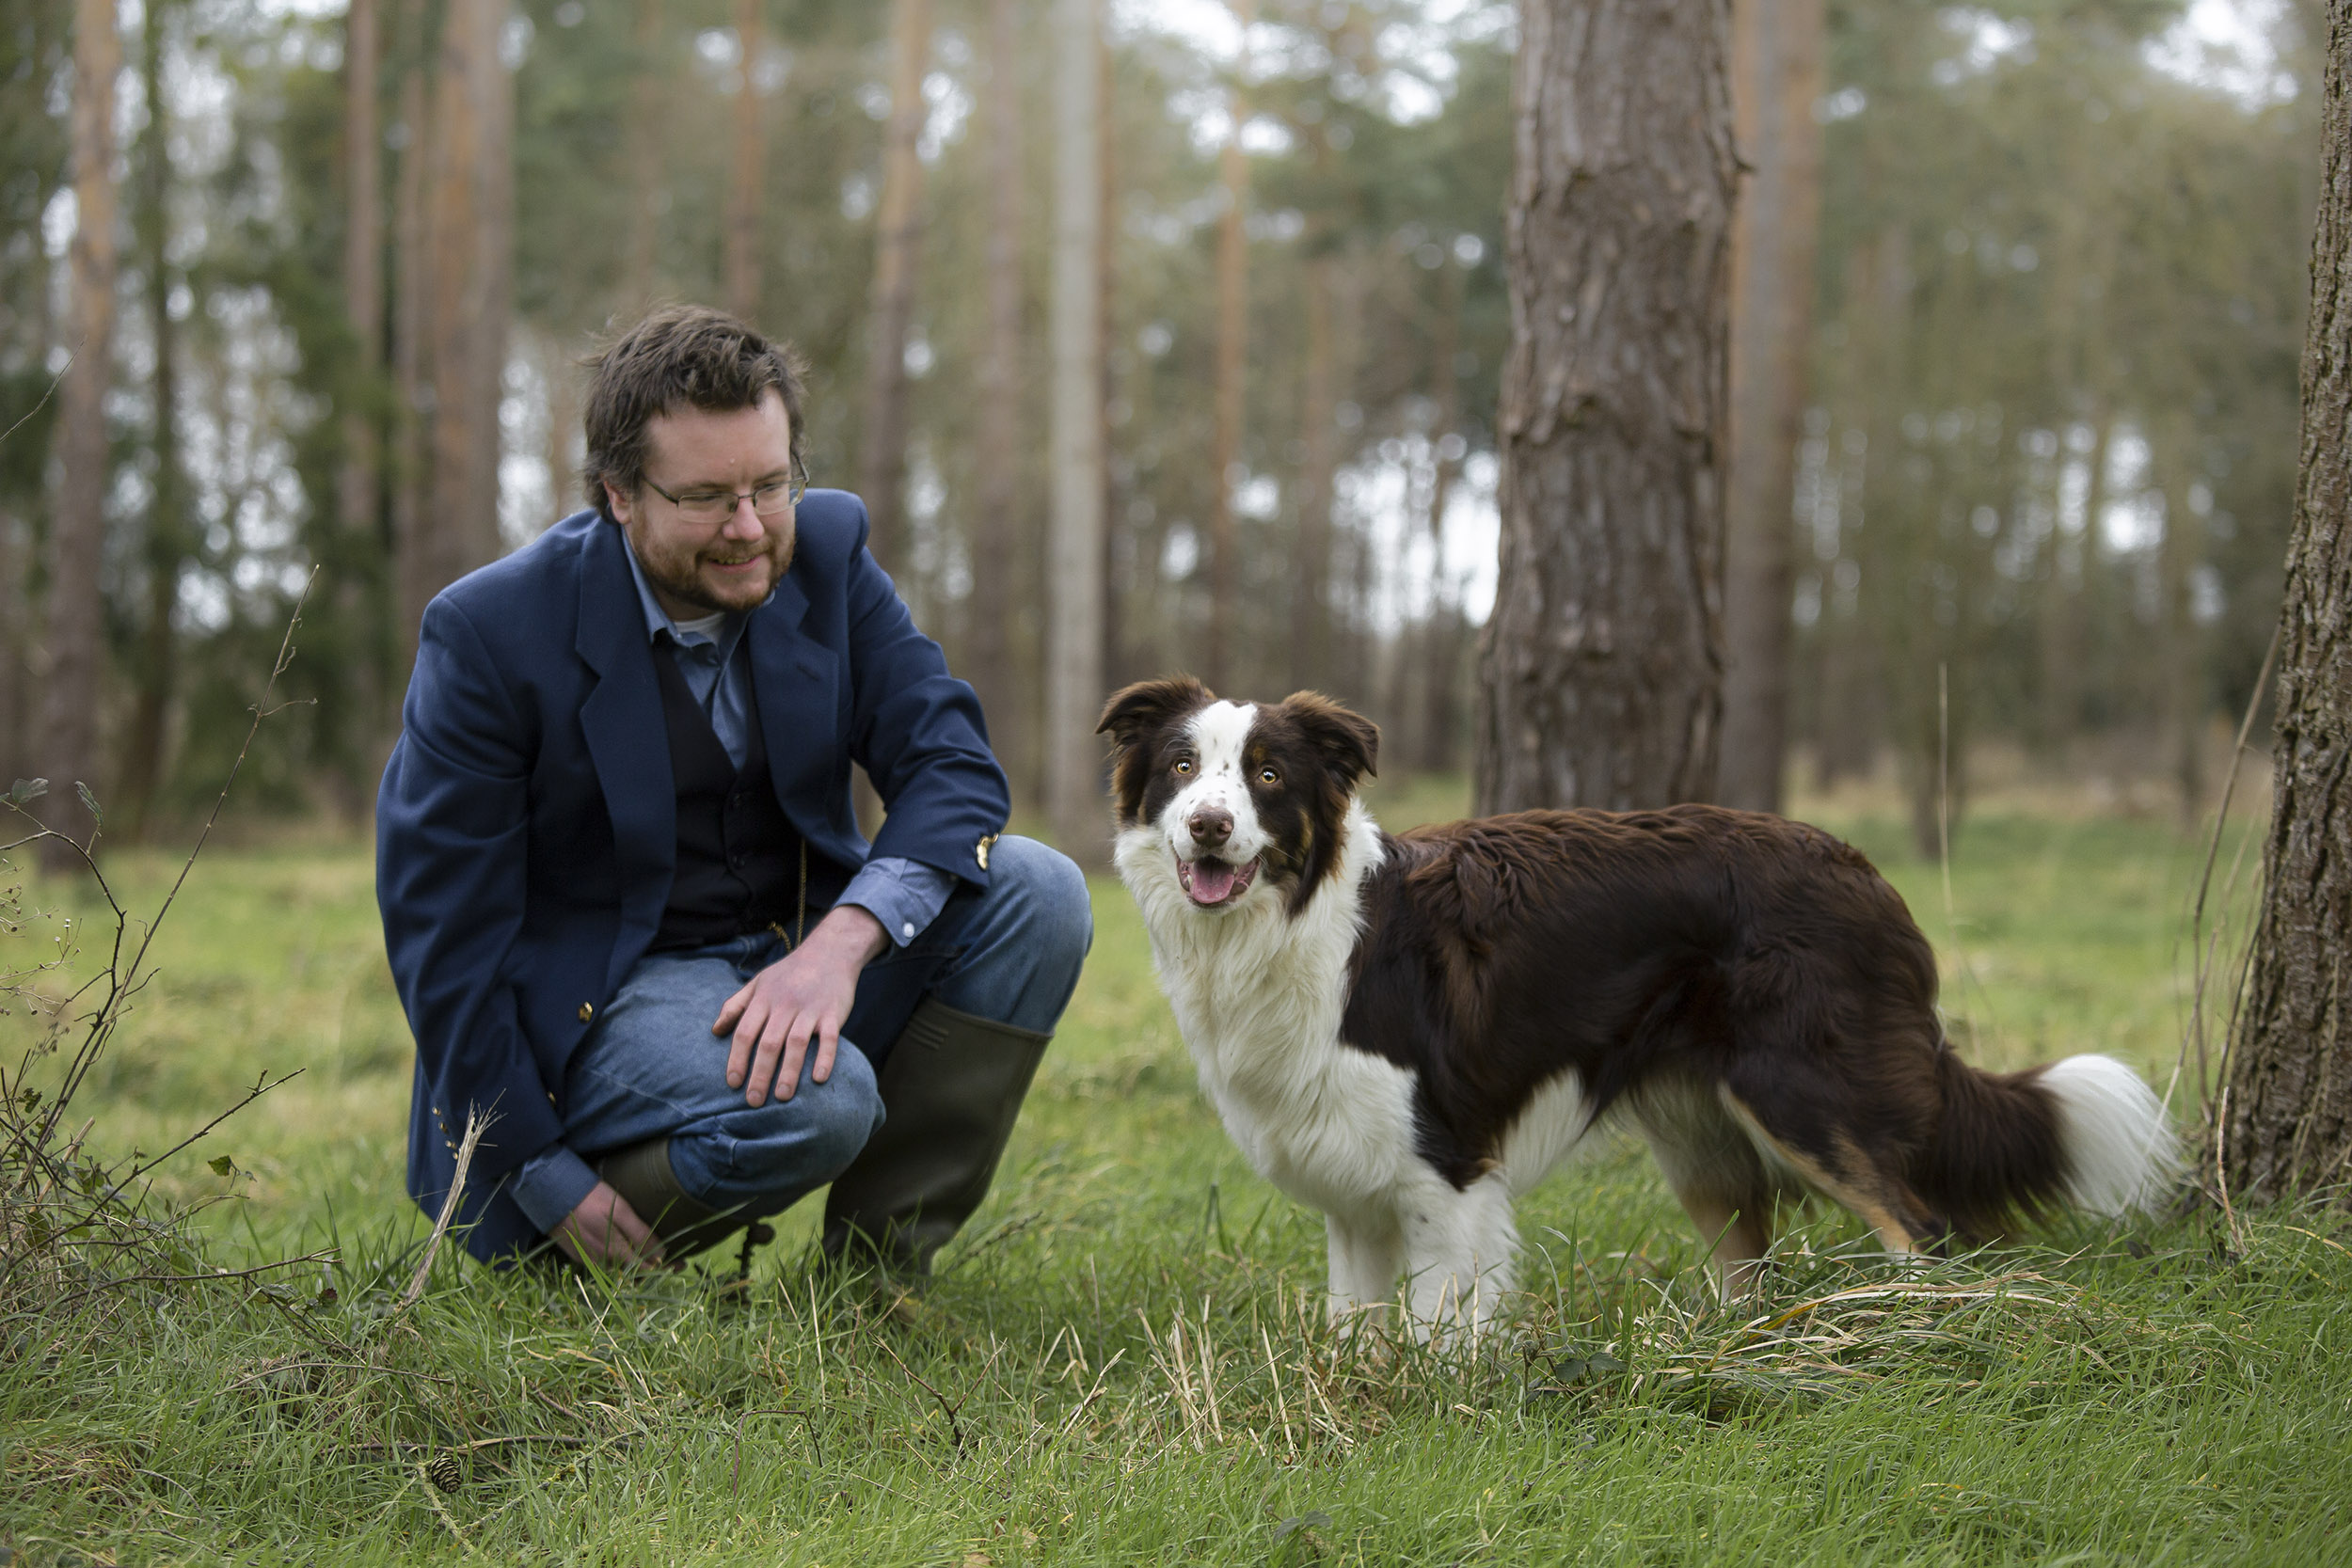 Photograph by Charlotte Hutchins showing a border collie dog and human crouched on the forest floor, looking at the camera.